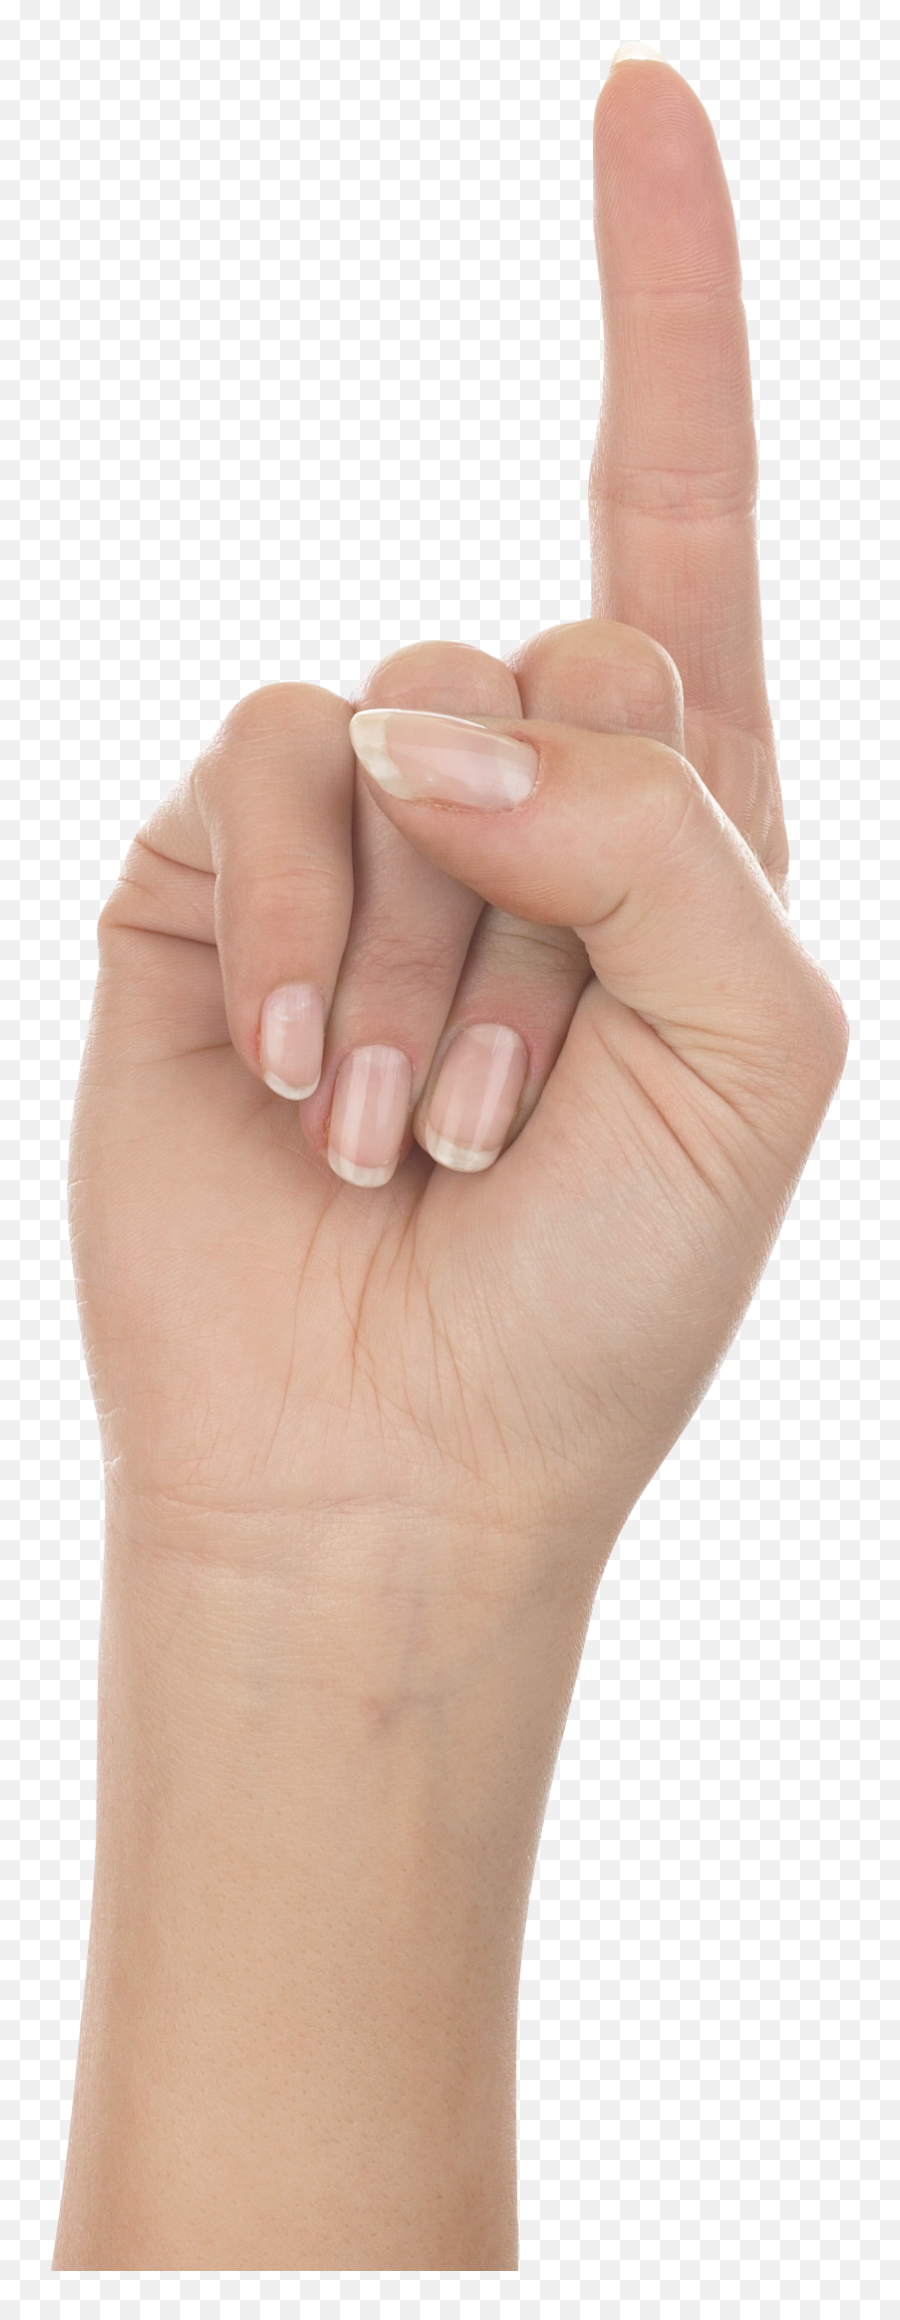 Hands Png Hand Image Free - Nail Care Emoji,Hands Png